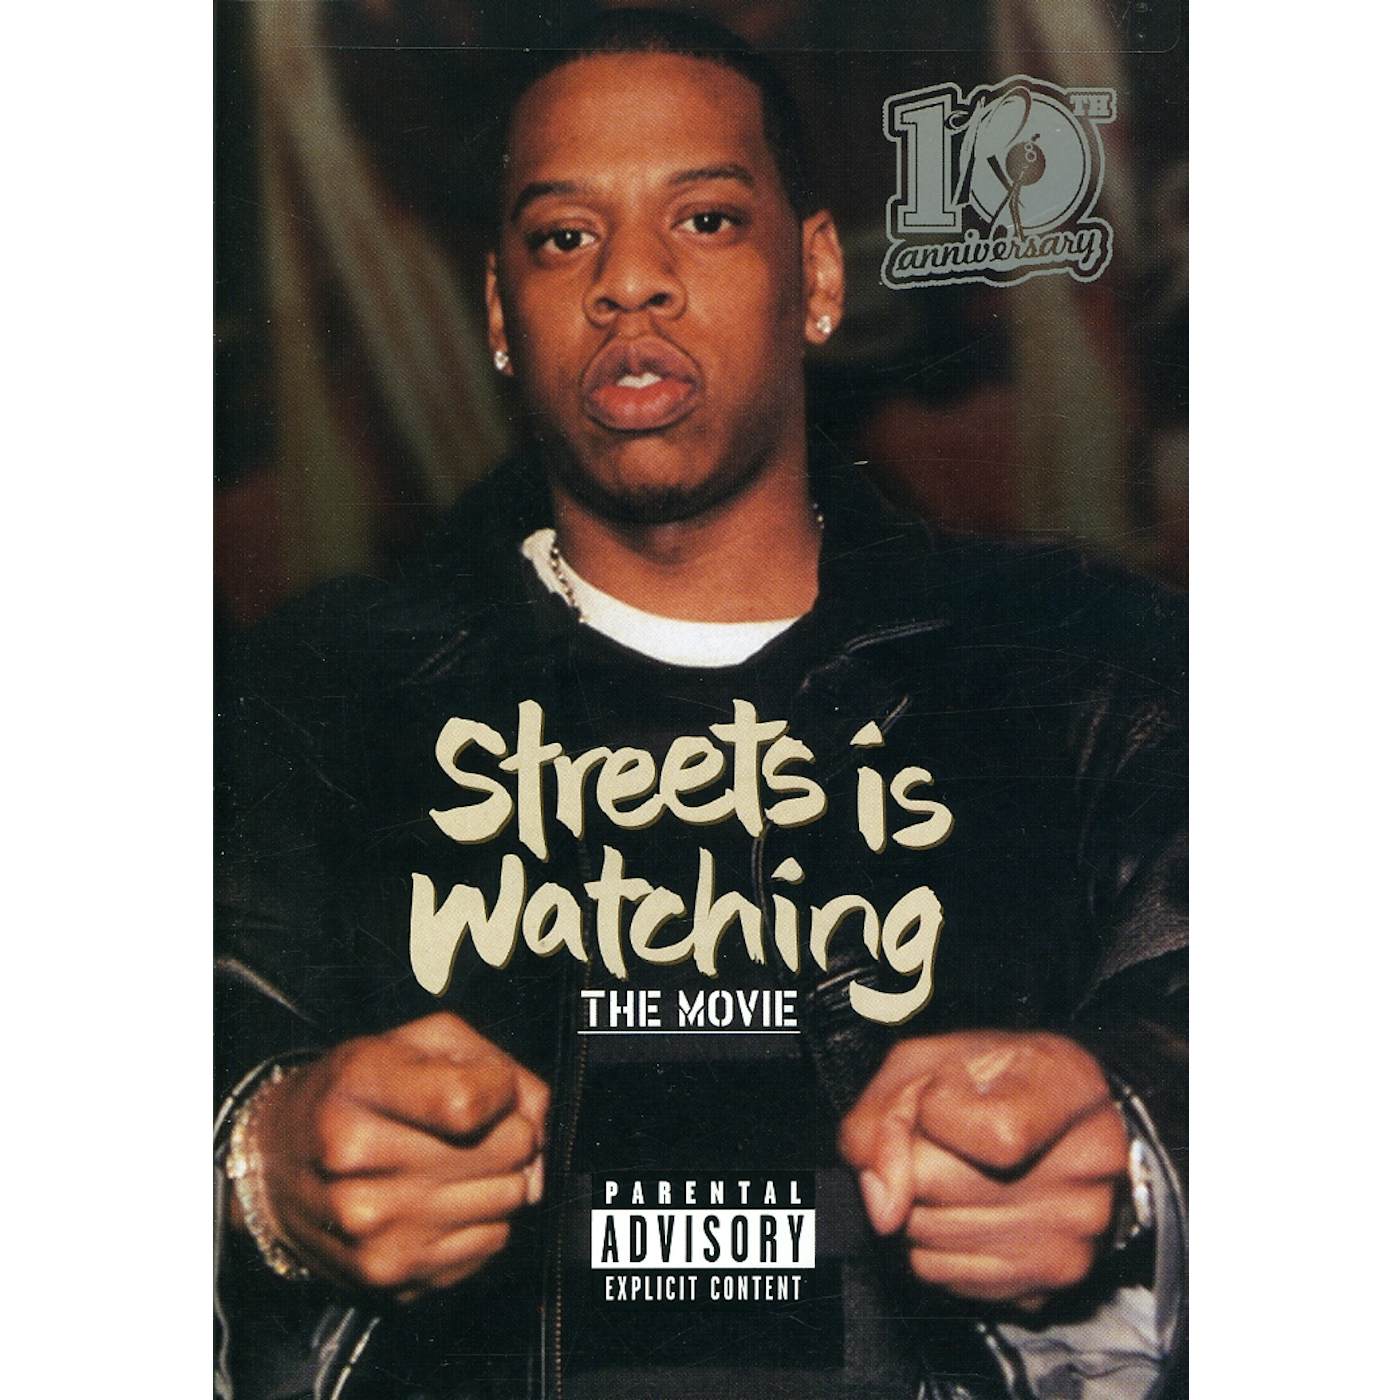 JAY-Z STREETS IS WATCHING DVD